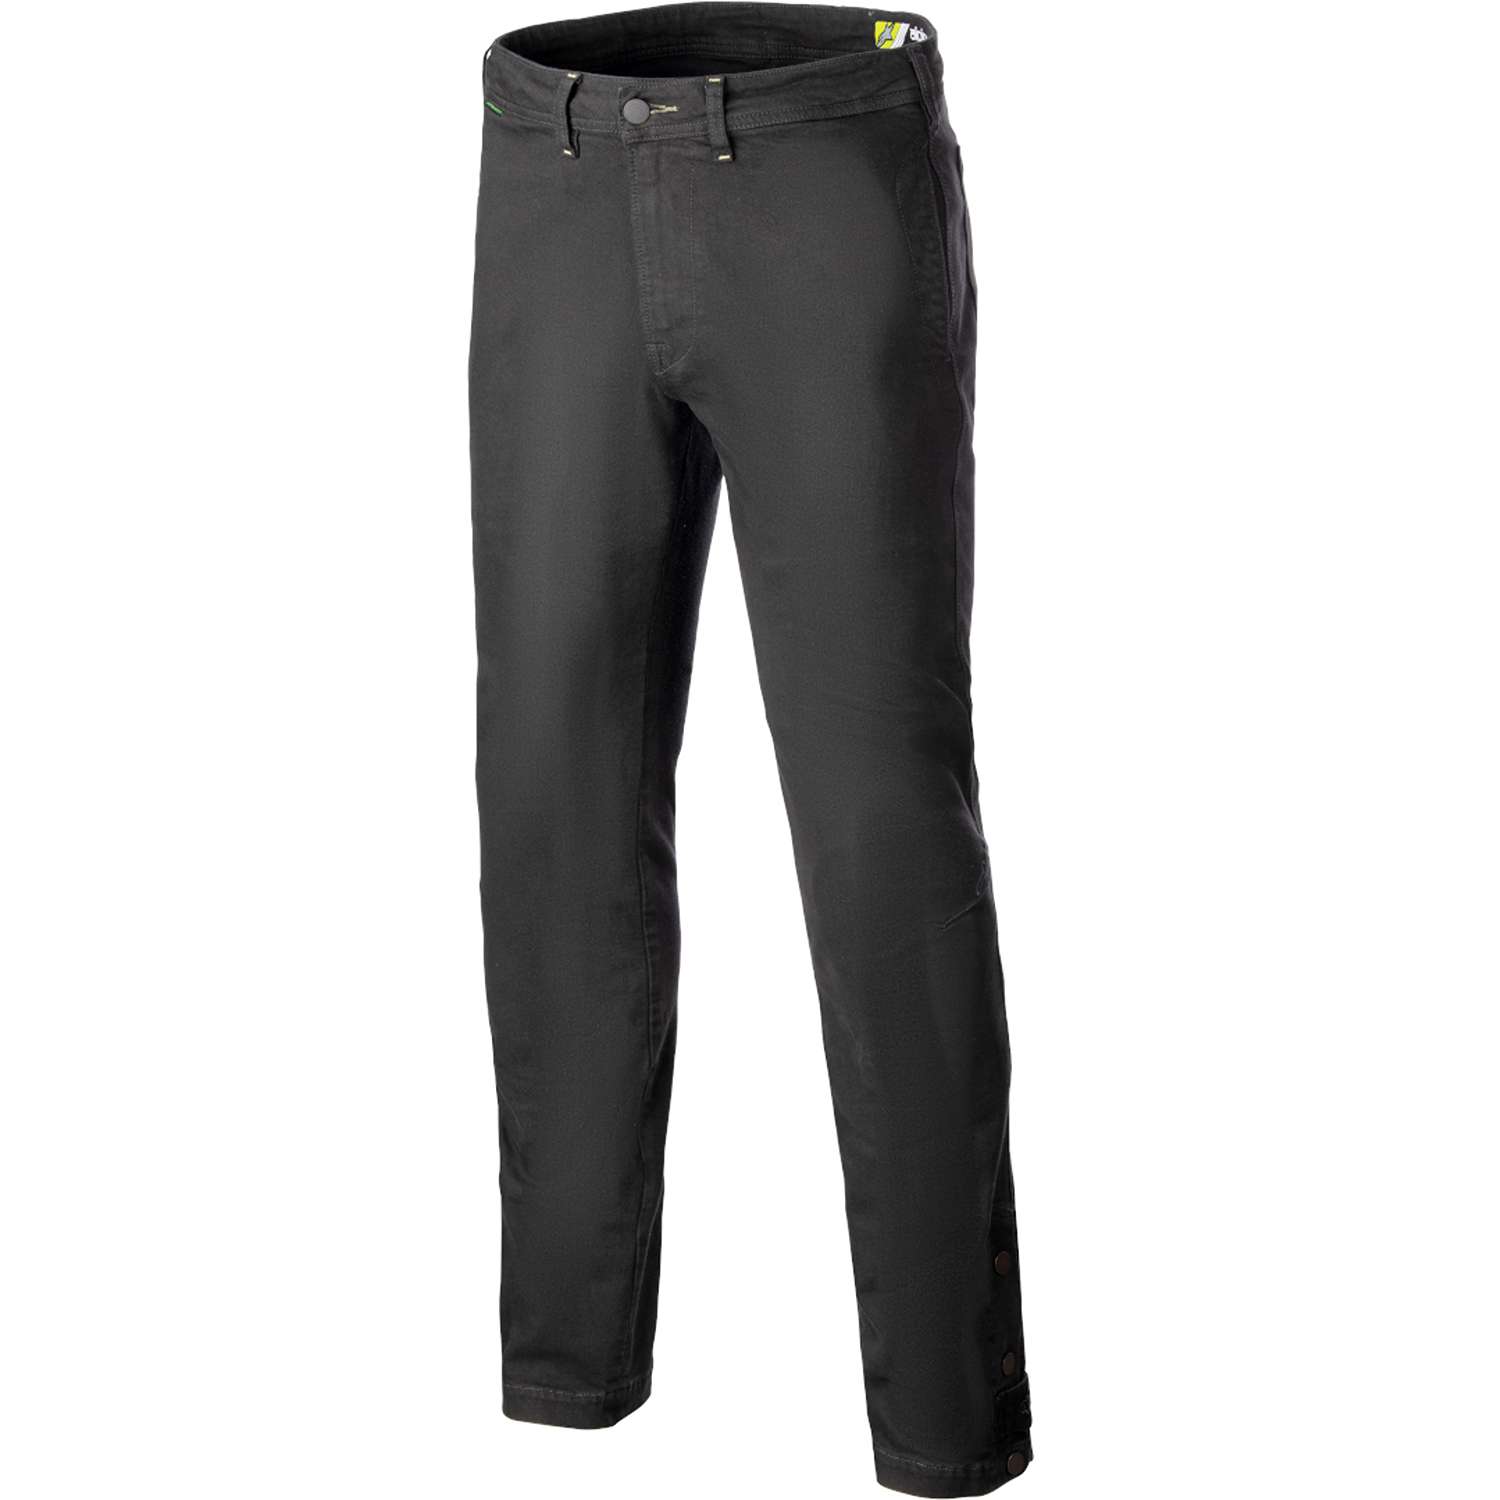 Image of Alpinestars Stratos Regular Fit Tech Riding Pants Anthracite Taille 36